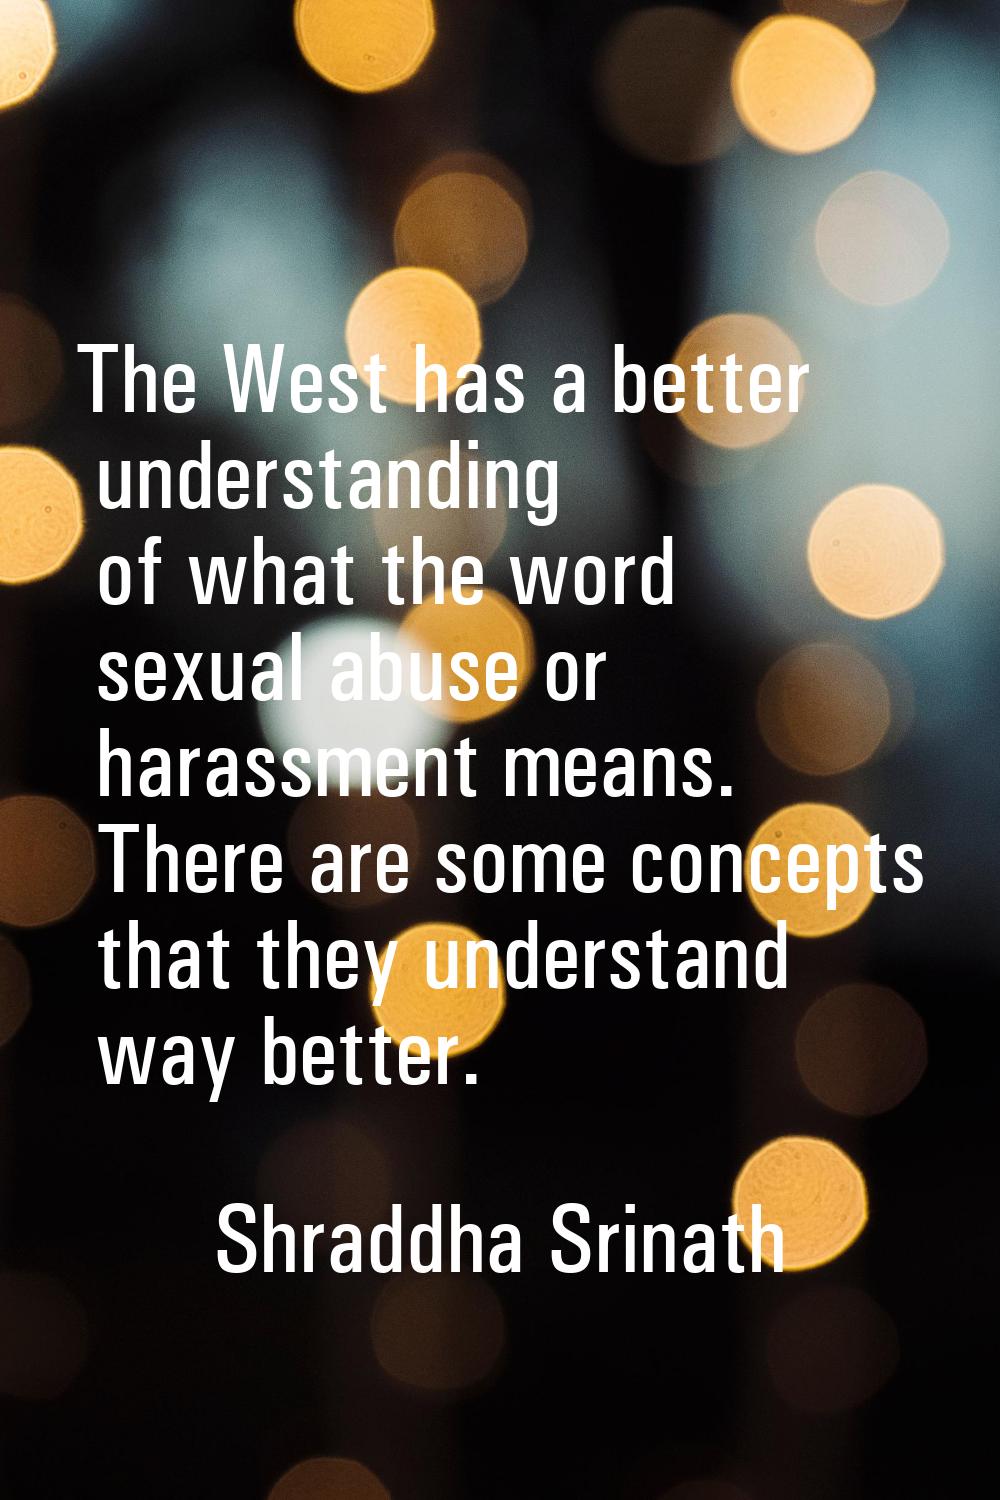 The West has a better understanding of what the word sexual abuse or harassment means. There are so